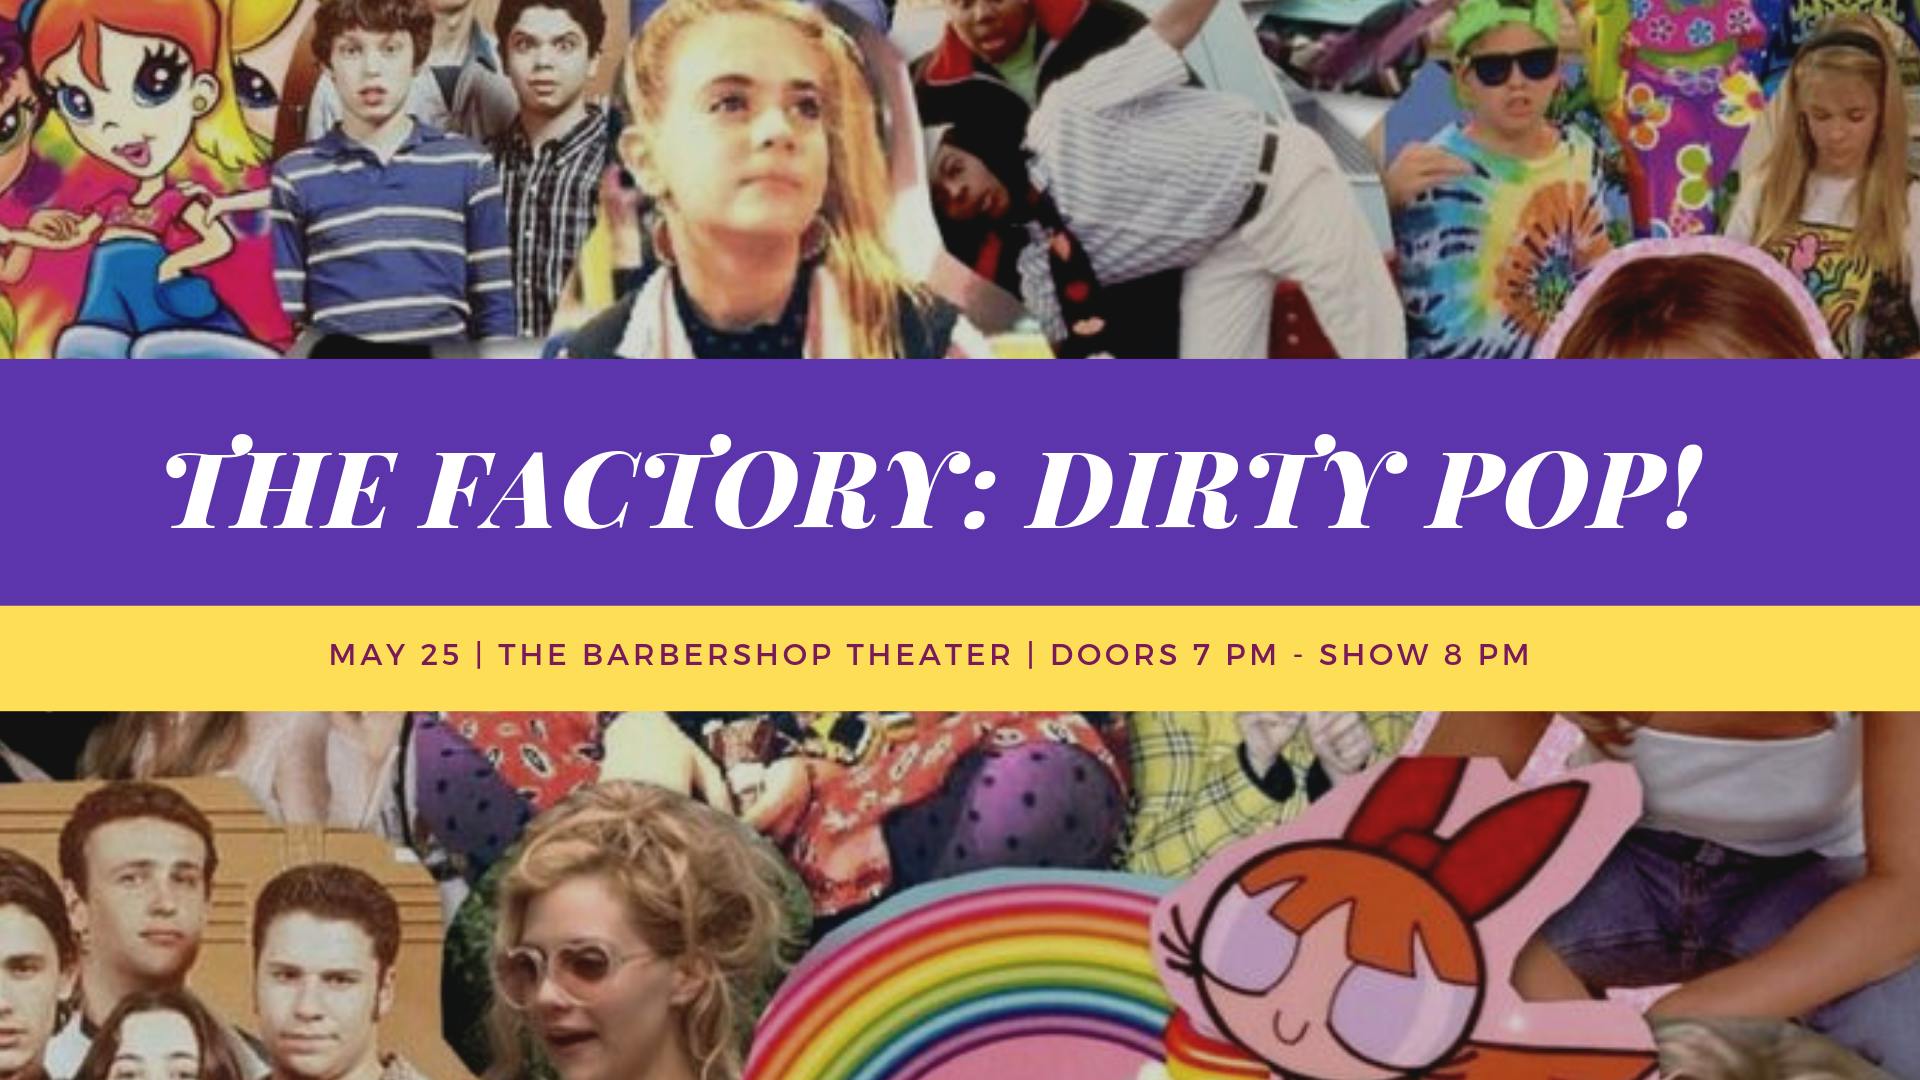 The Factory: Dirty Pop!